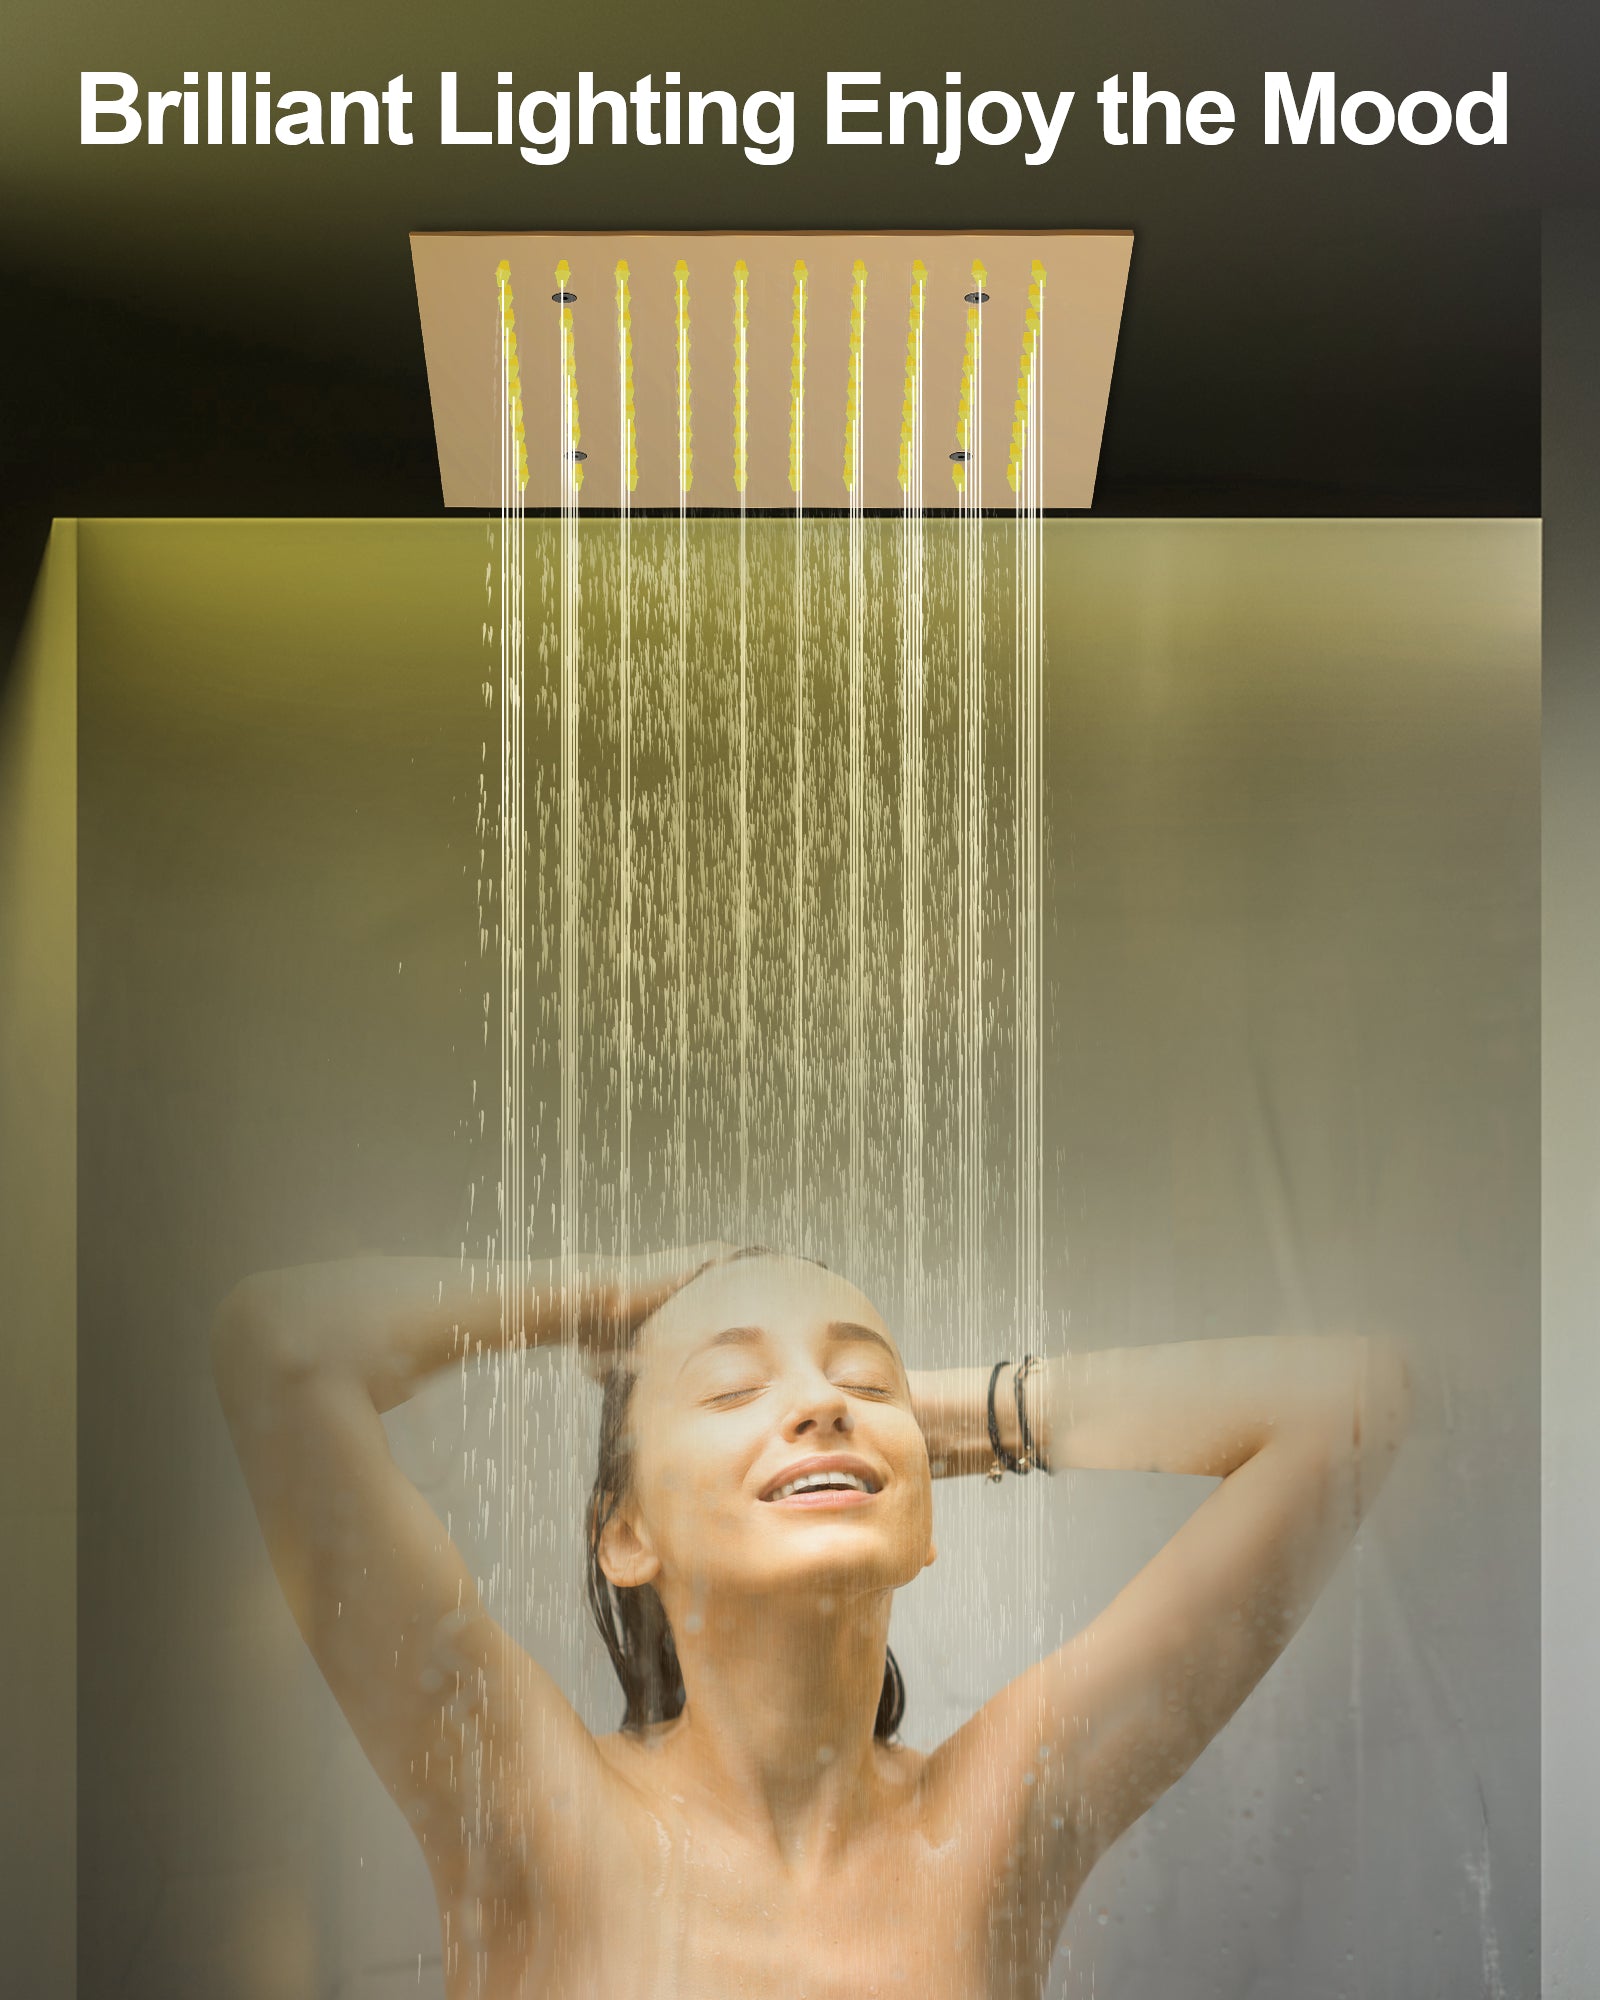 EVERSTEIN Rose Gold Luxury Rain Shower System - 12" Ceiling Rainfall Head with Color Changing LED Lights & Body Massage Jets